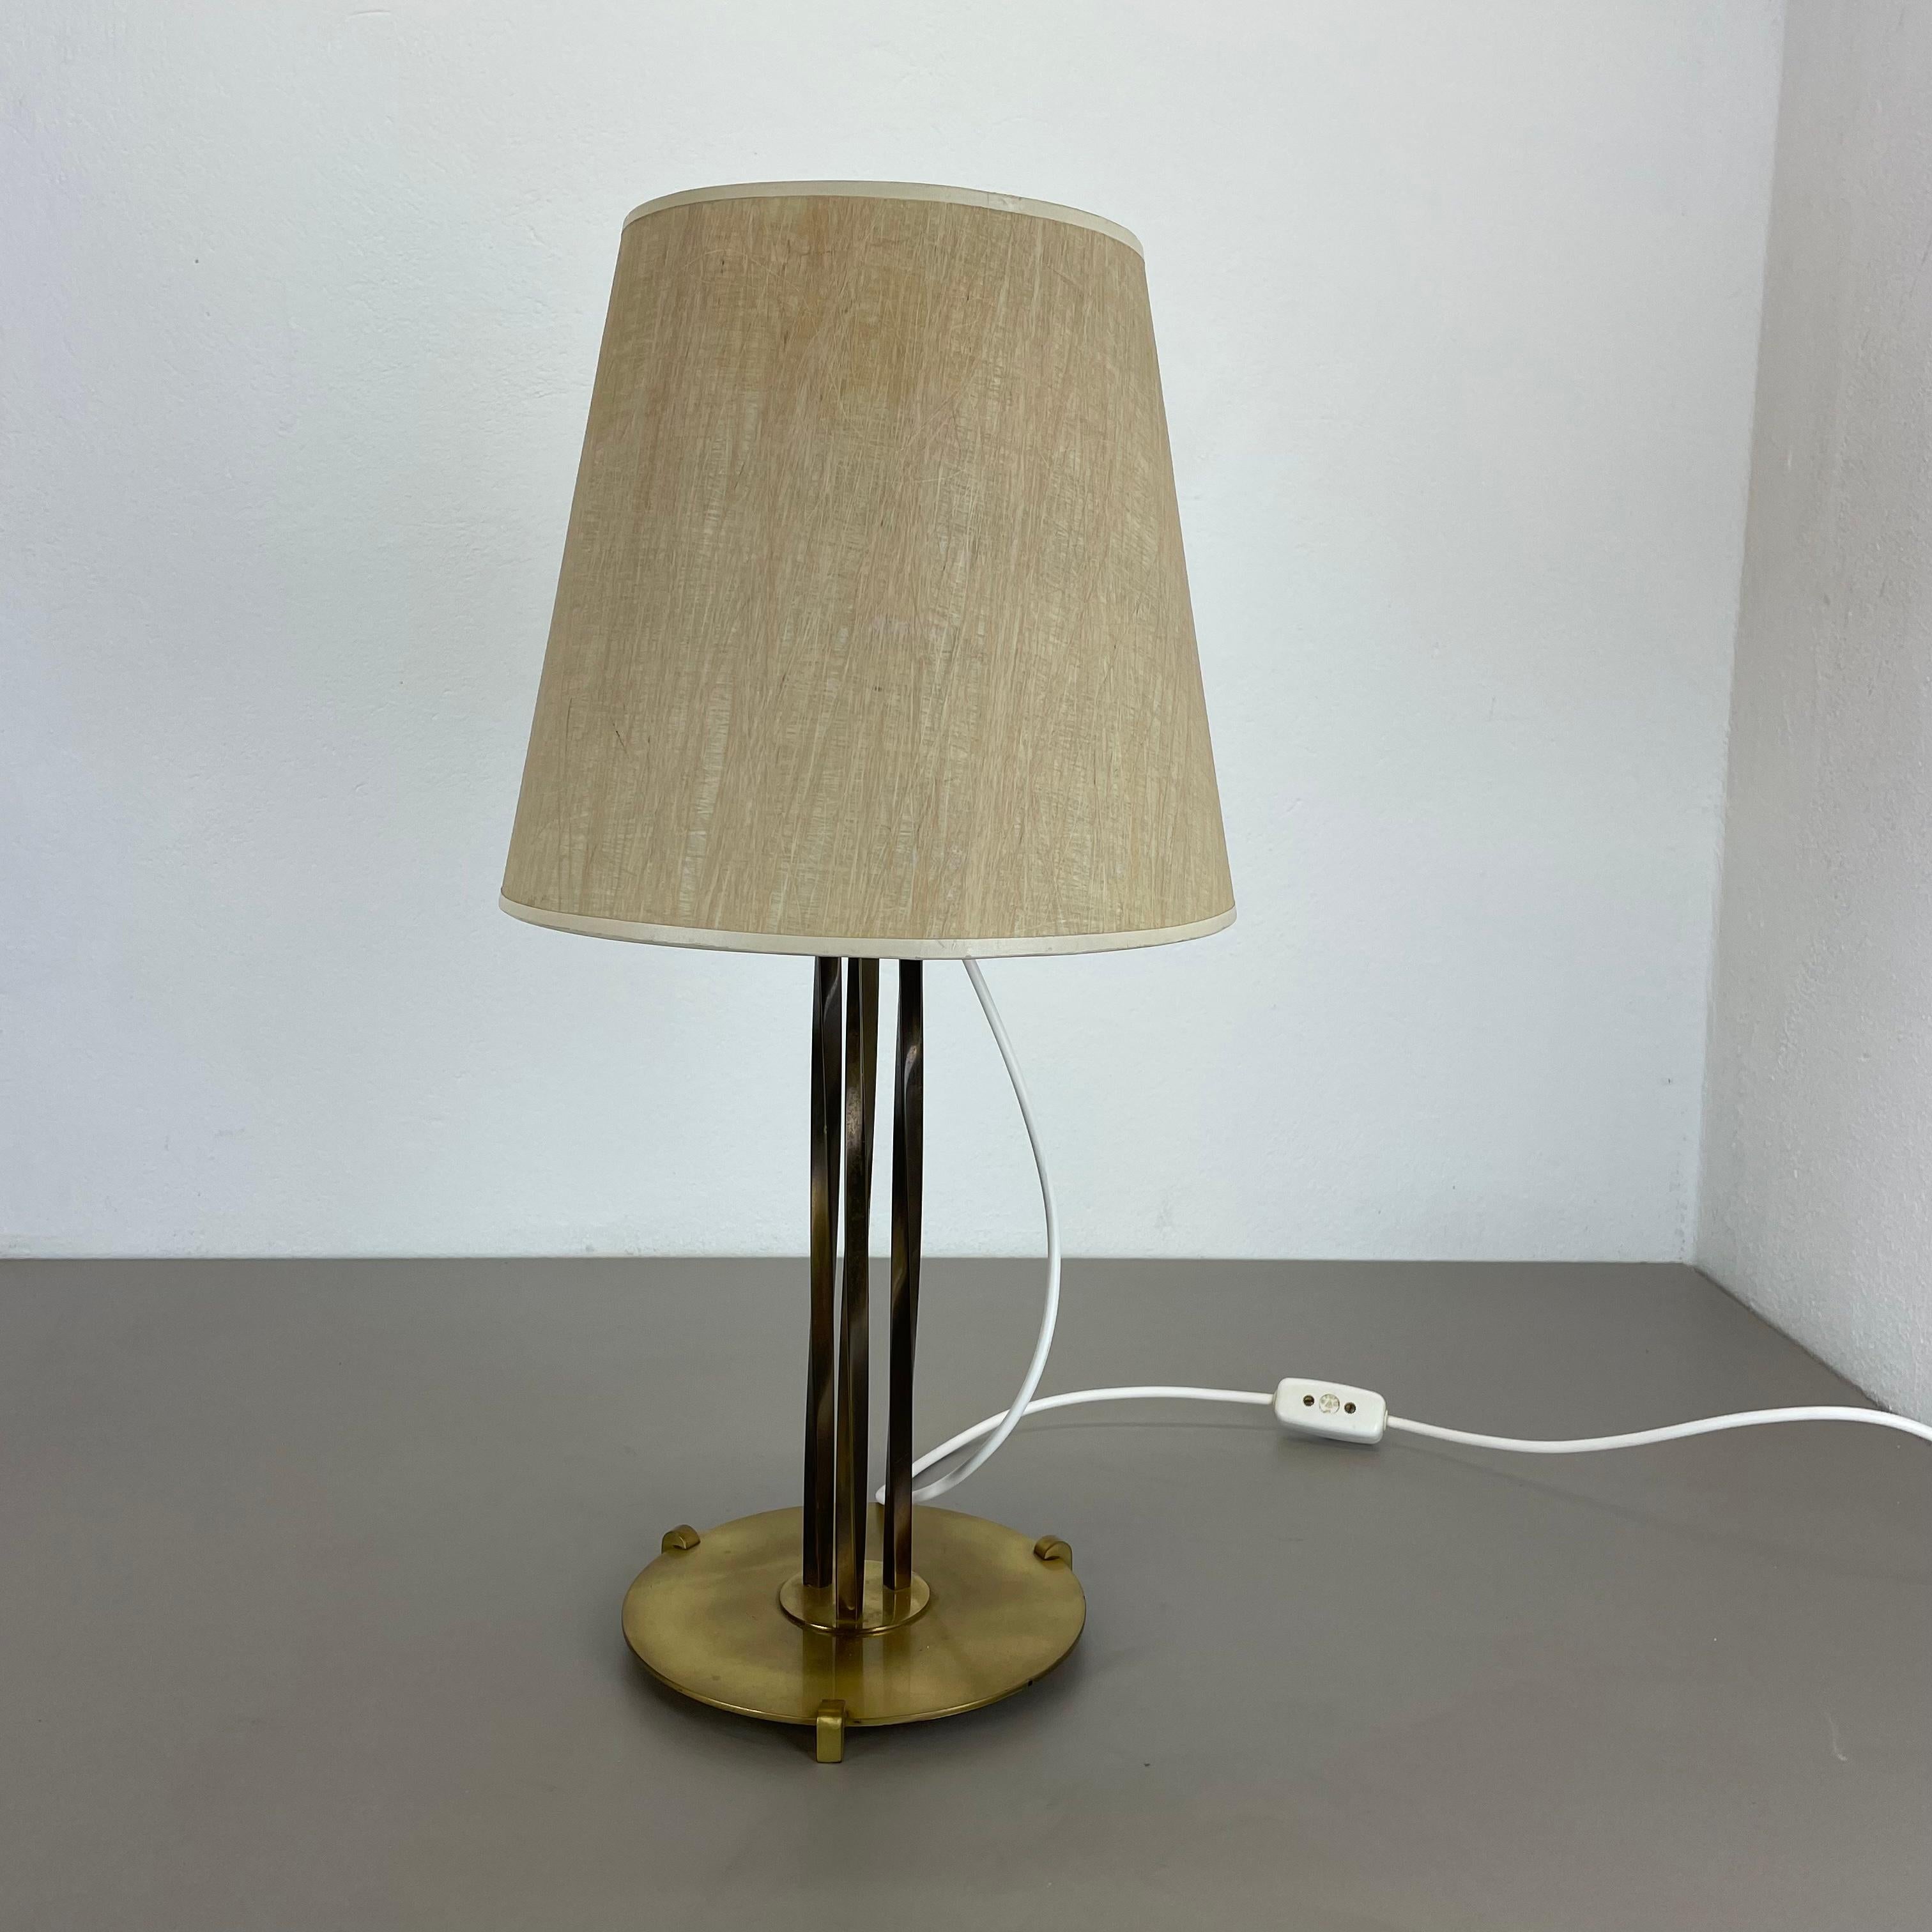 Article:

table light


Origin:

Austria


Age:

1960s


This original vintage table light was designed and produced in the 1960s in Austria. the super rare and minimalist stand element is made of brass combined with 3 upright